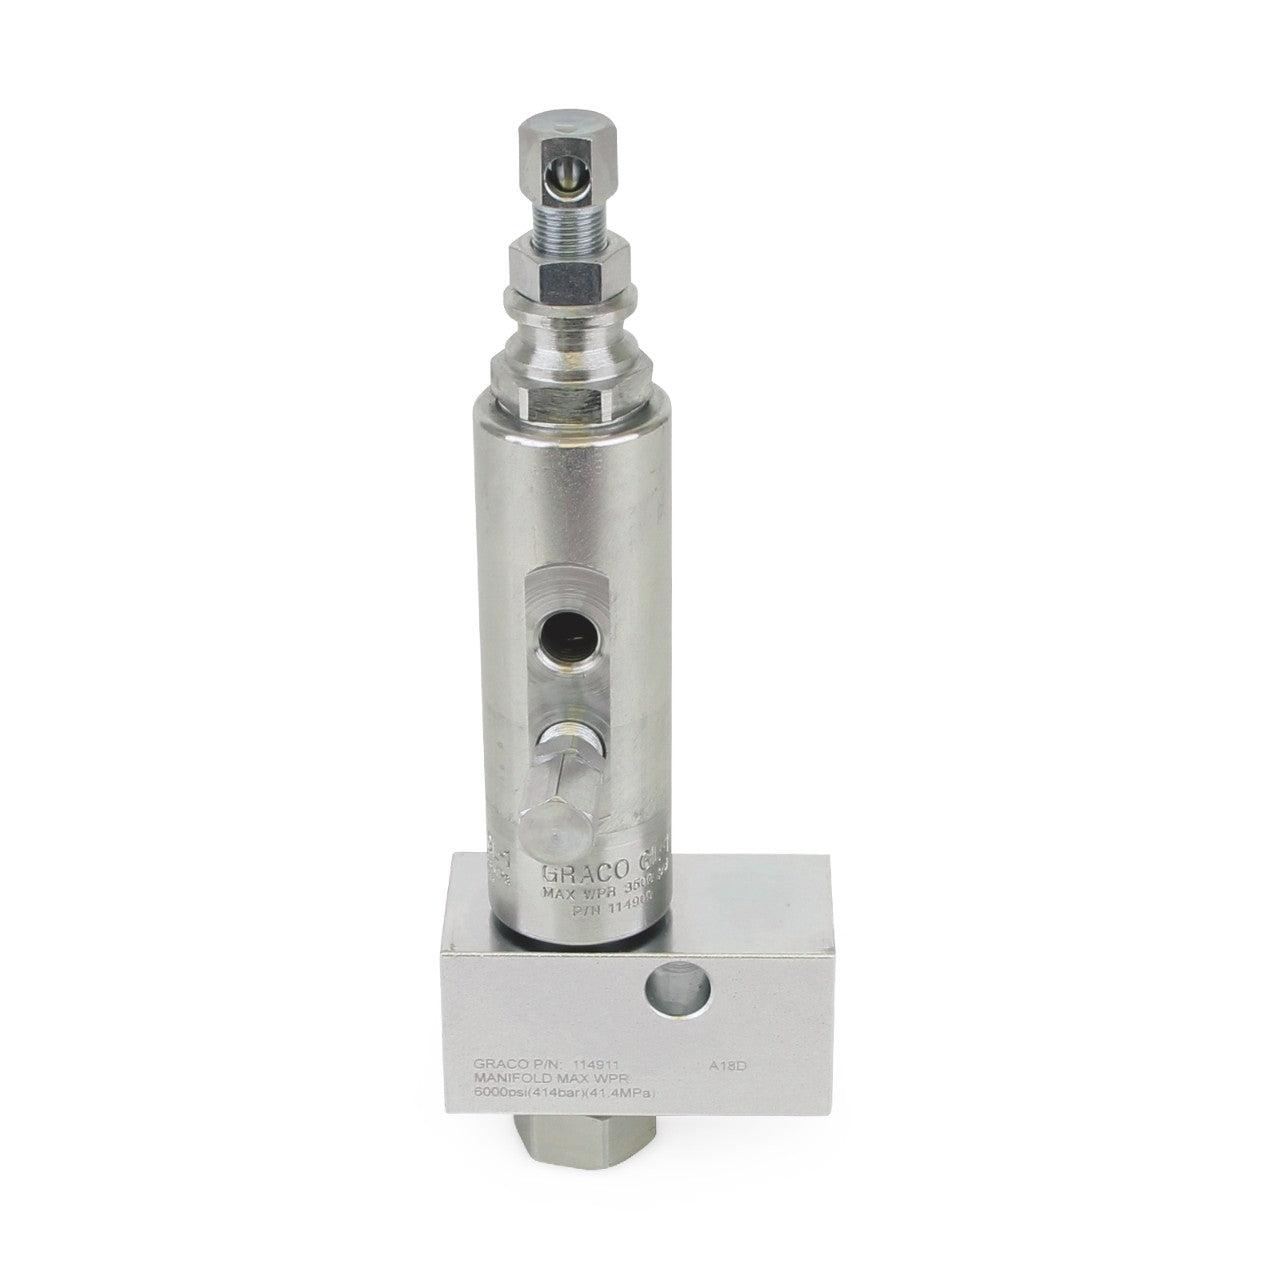 GL-1‚Ñ¢ Grease Injector - 1 Injector and Manifold